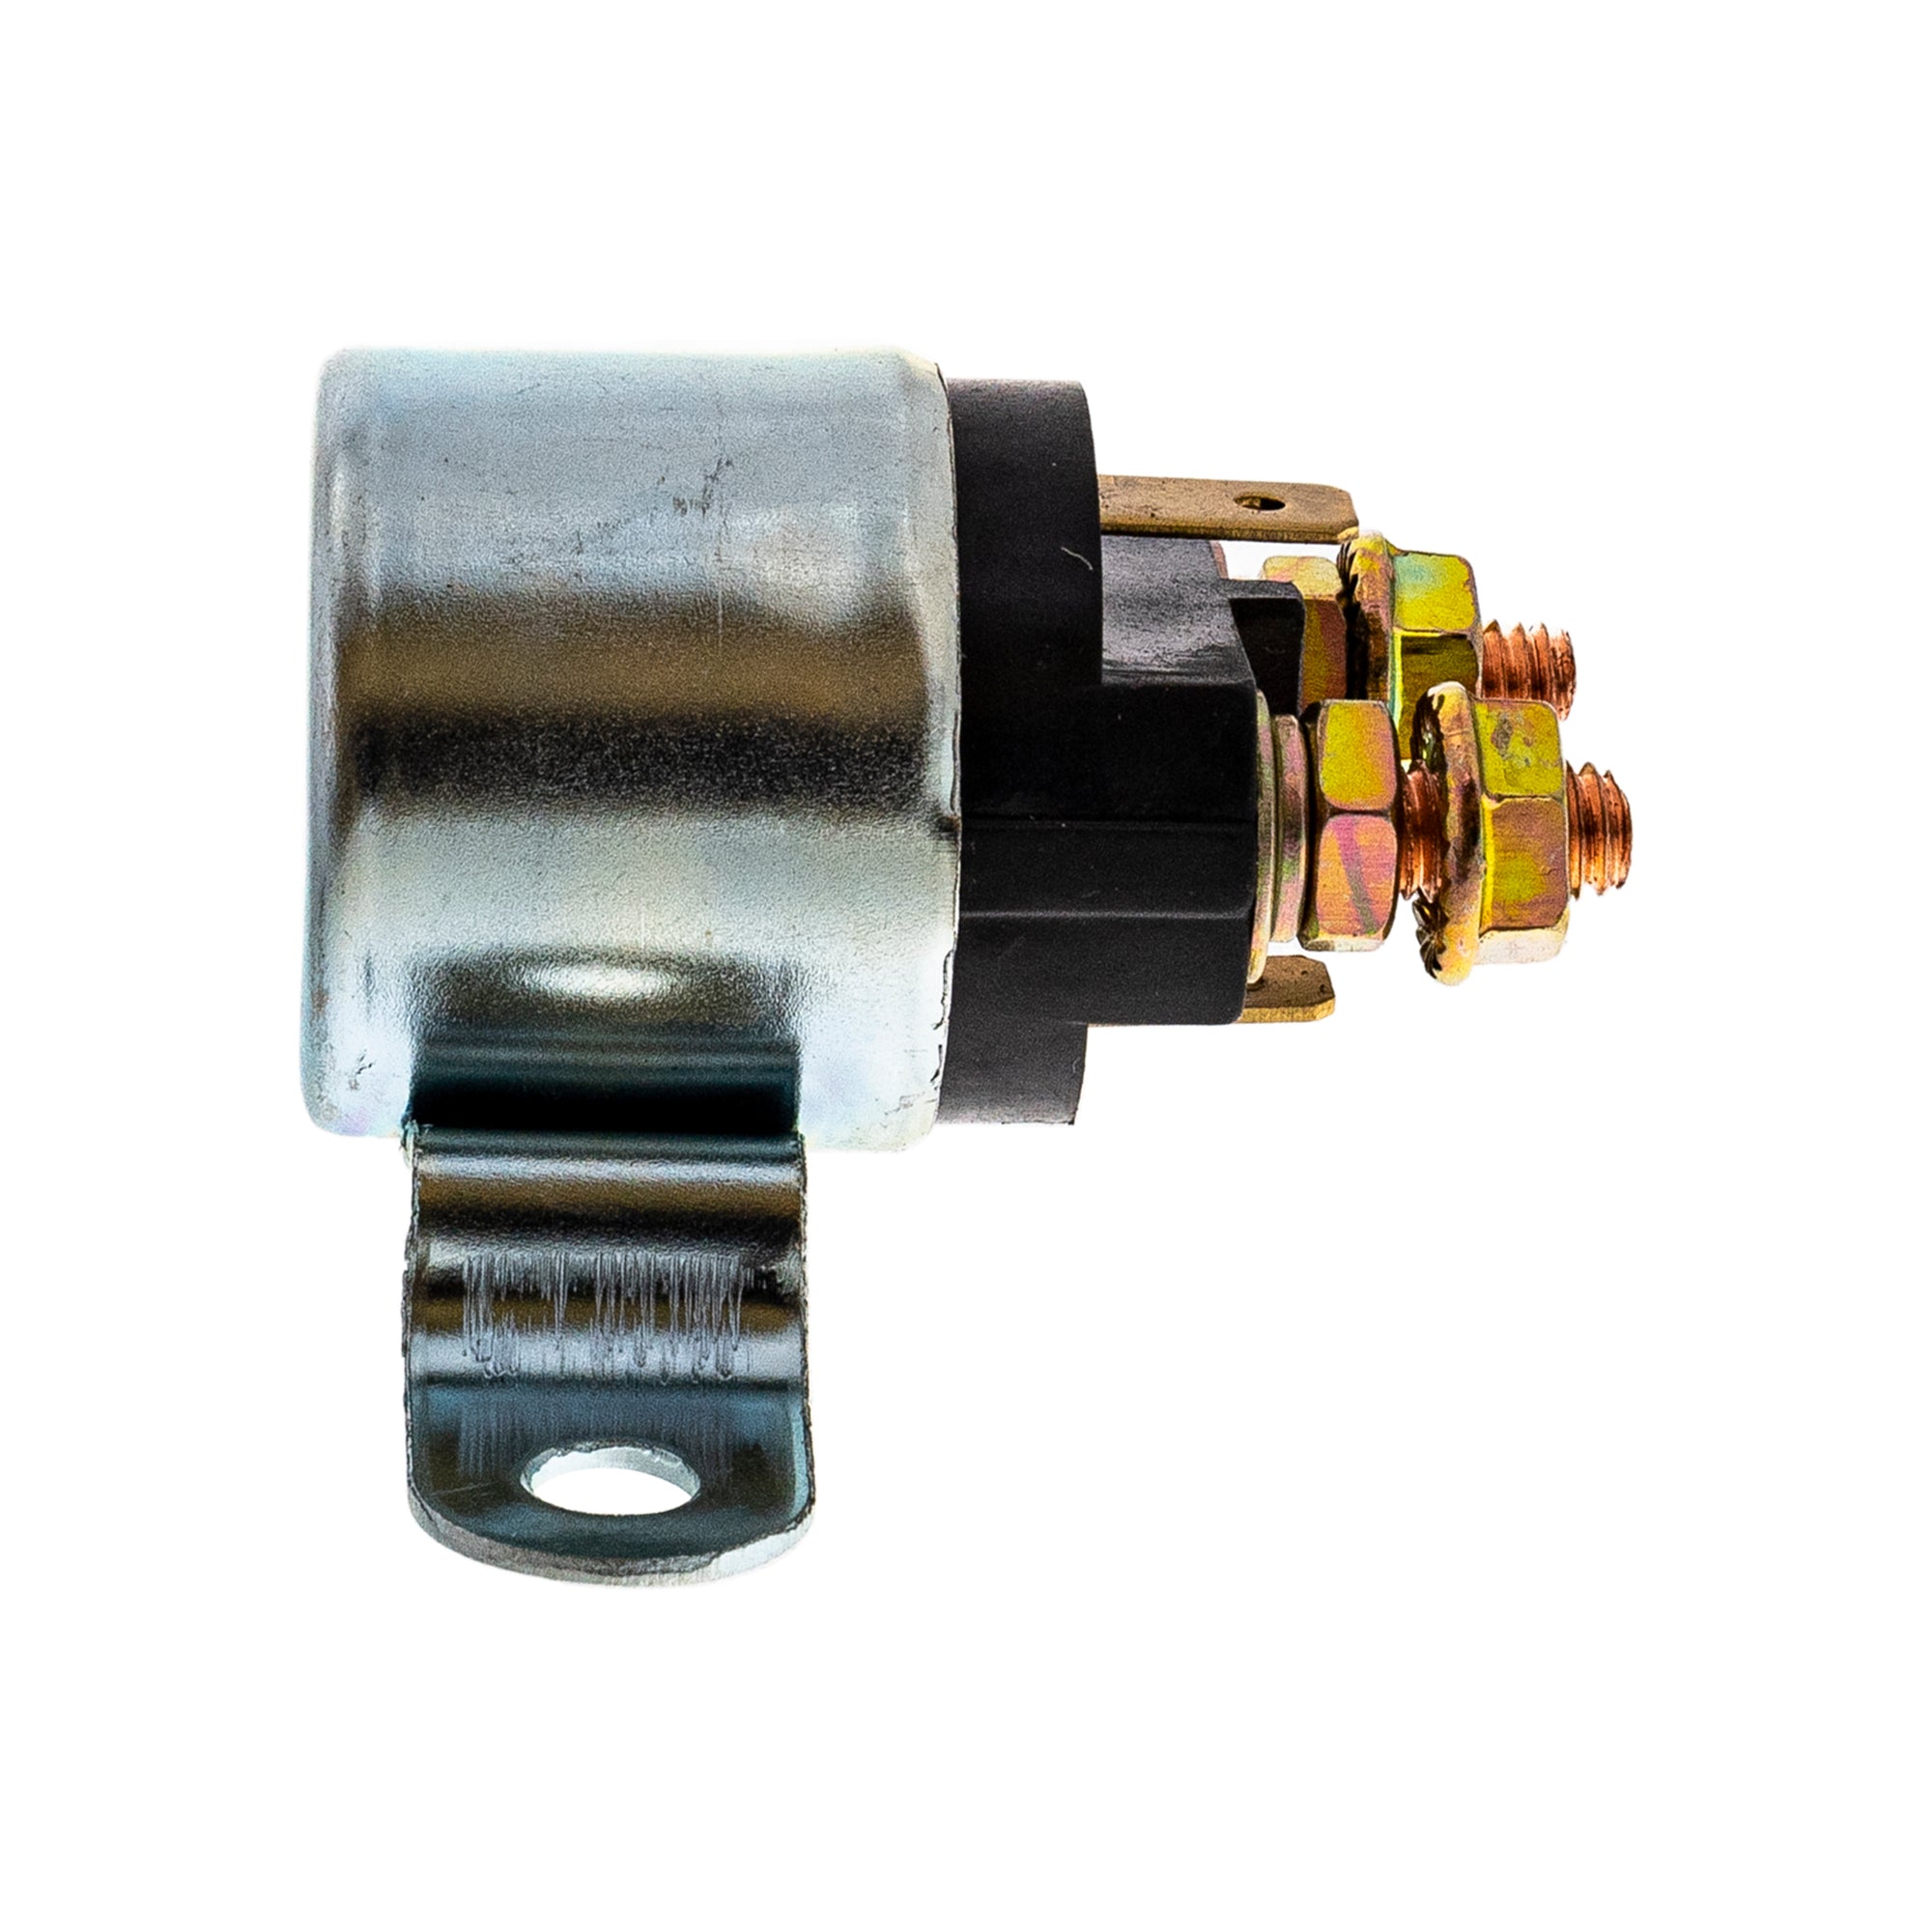 Starter Solenoid Relay Switch For Can-Am Bombardier Ski-Doo A38501179000 710007777 710001364